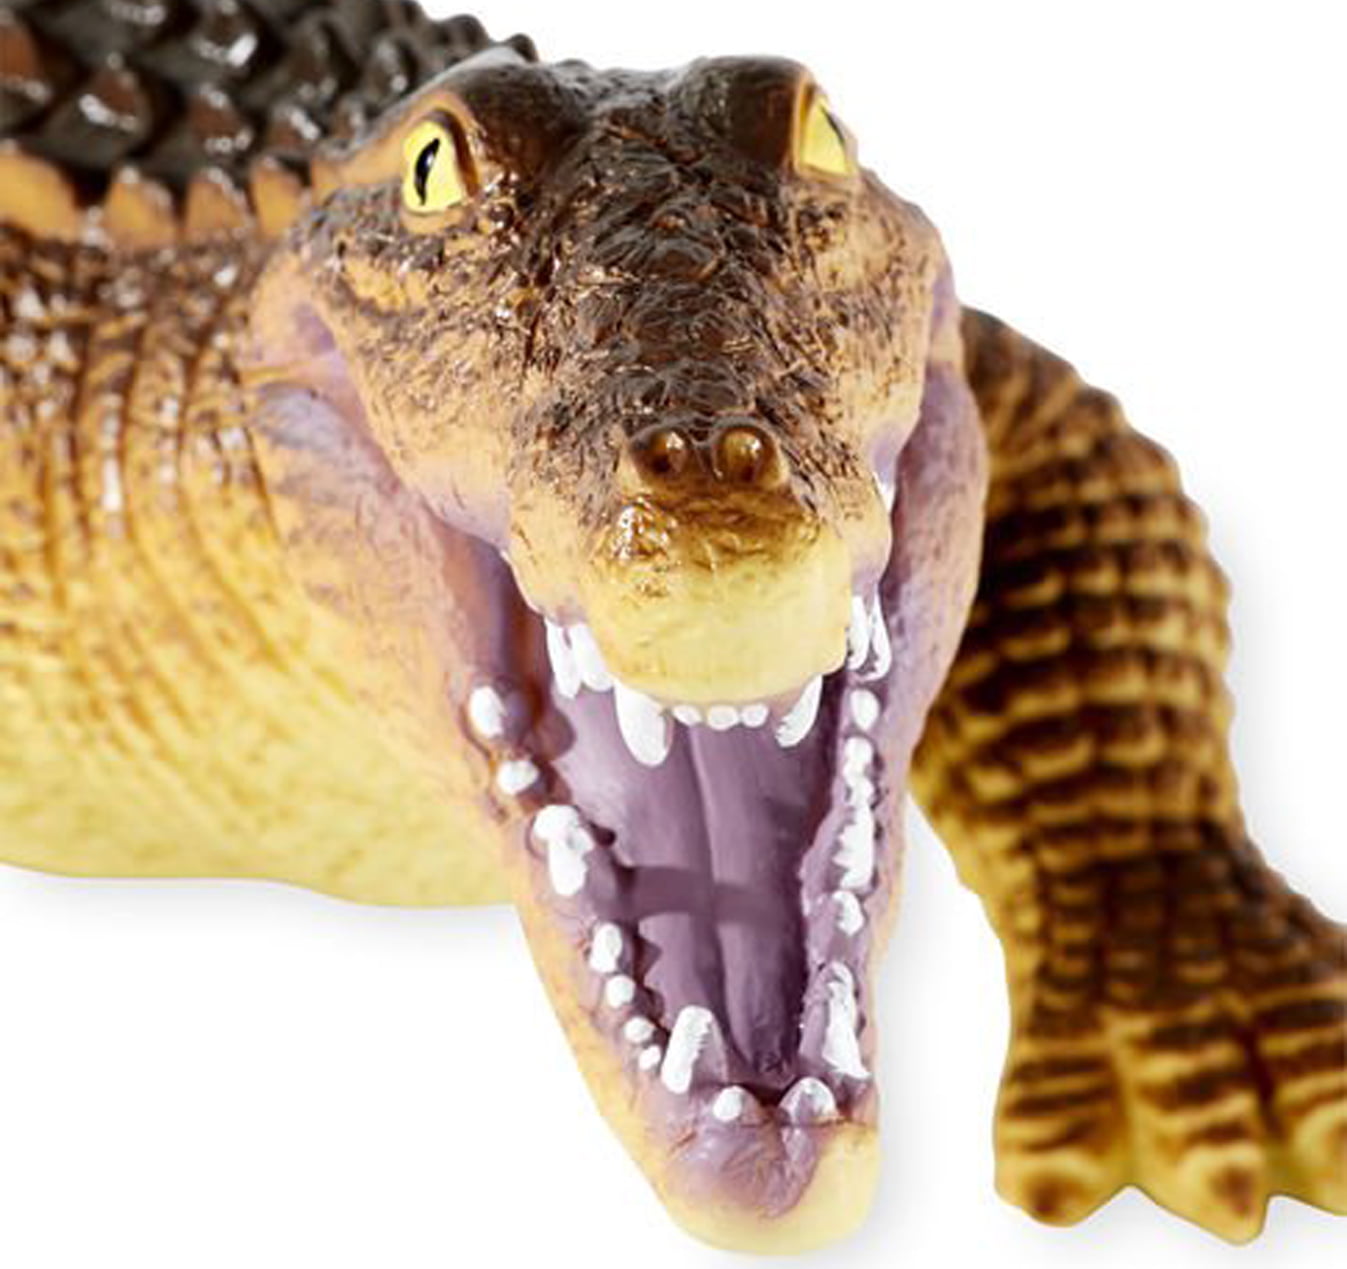 Toys R Us Animal Planet by Foam Crocodile - Realistic Looking -  Discontinued, Hard to Find 